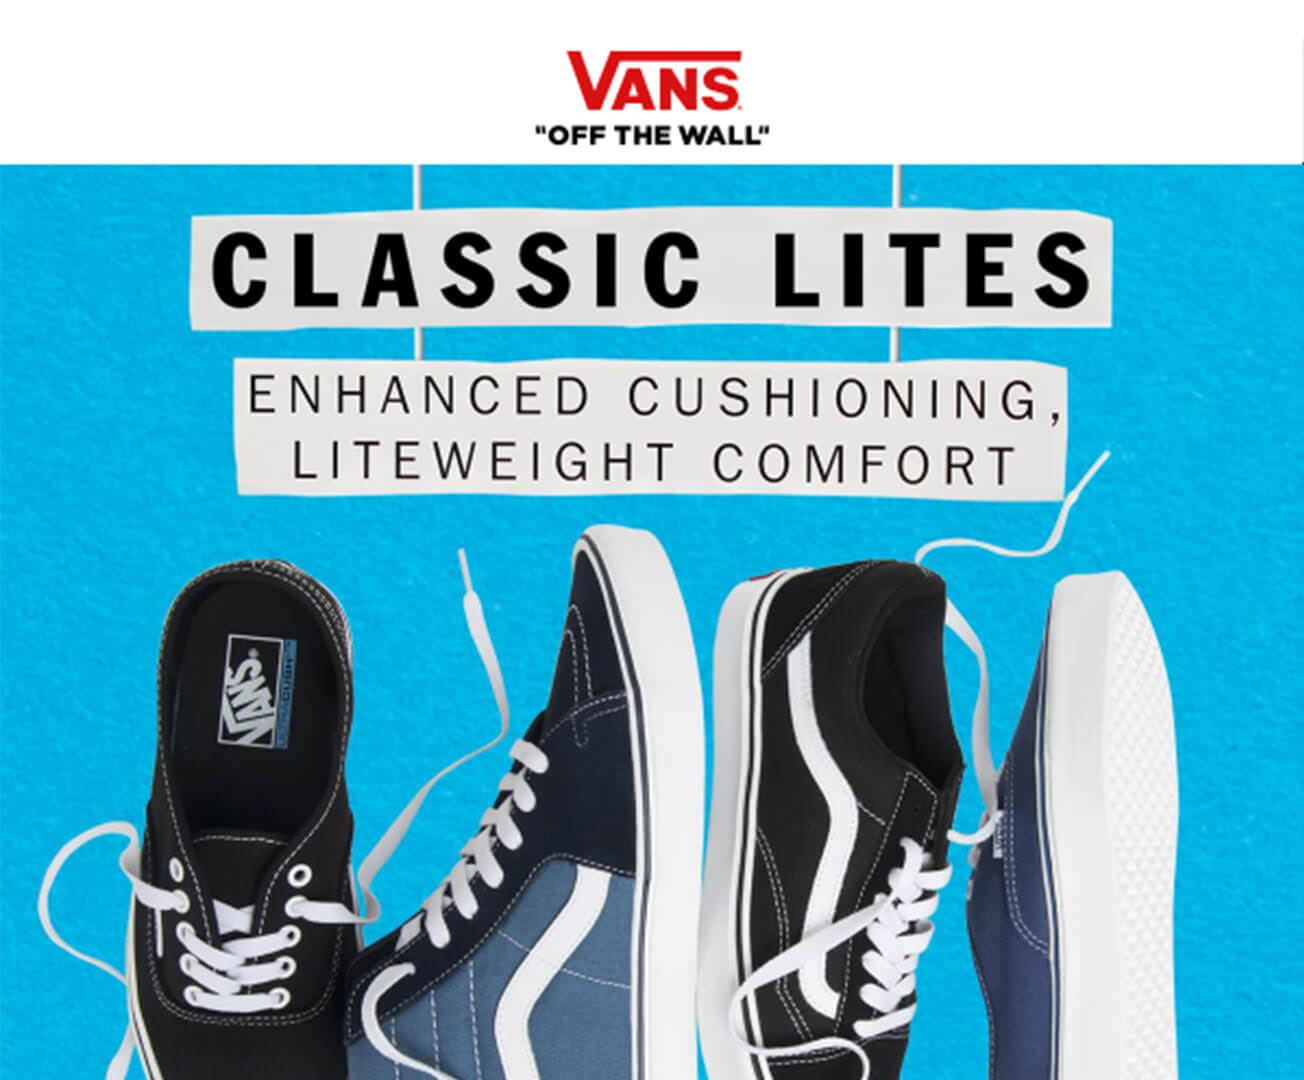 Vans - Email Marketing Campaign Example